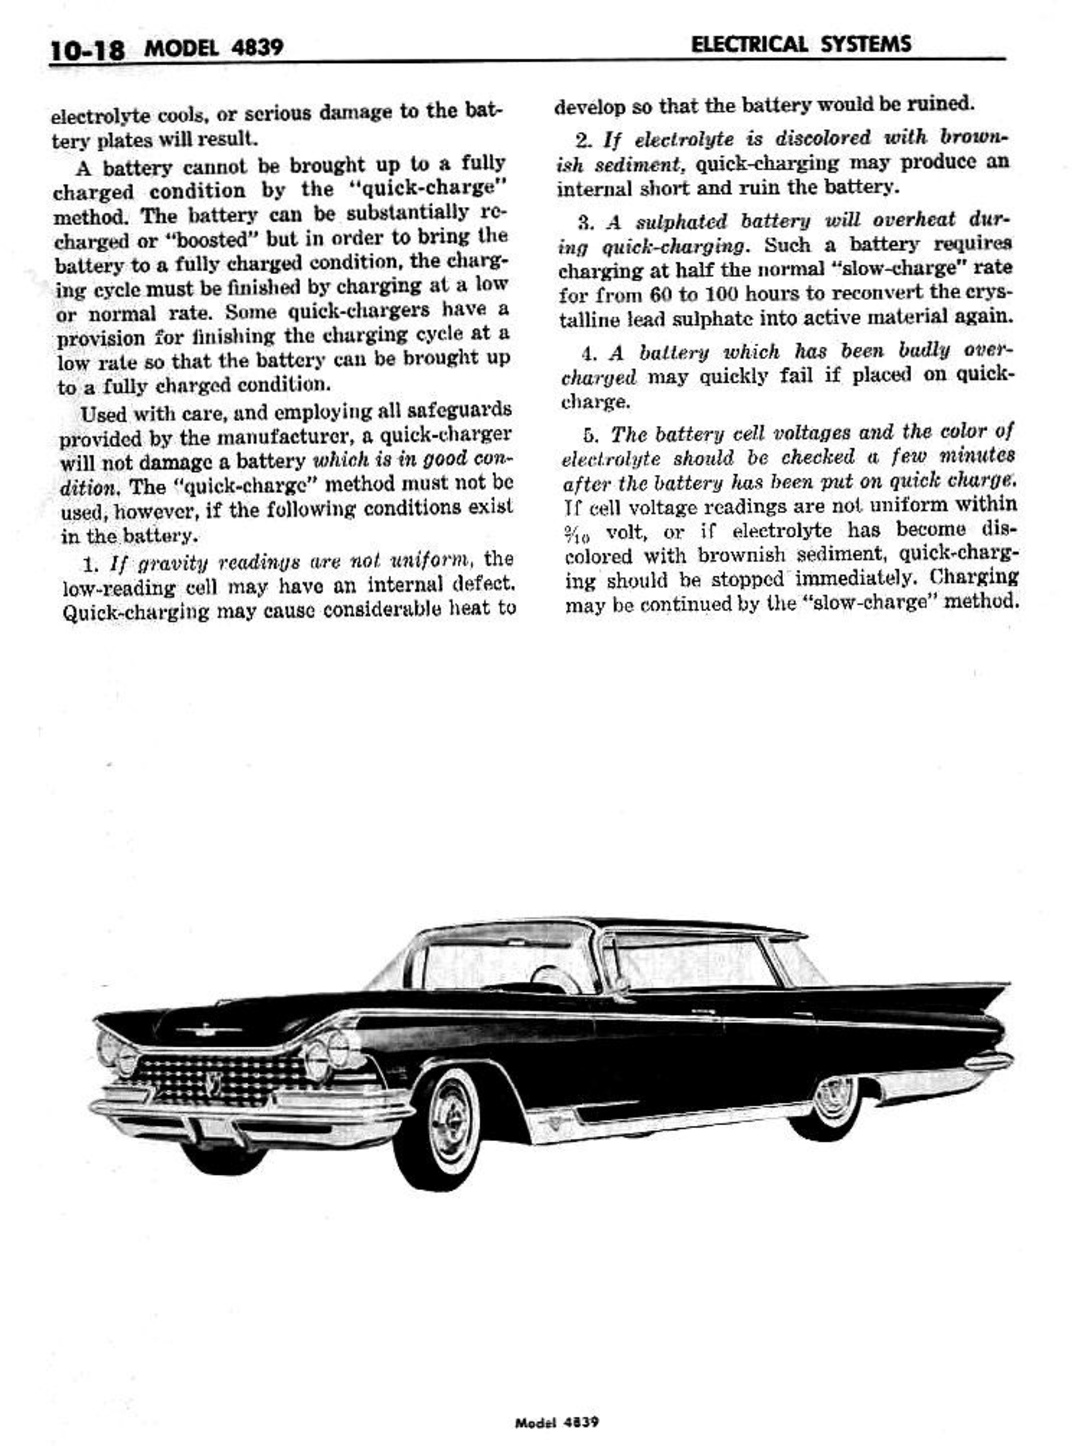 n_11 1959 Buick Shop Manual - Electrical Systems-018-018.jpg